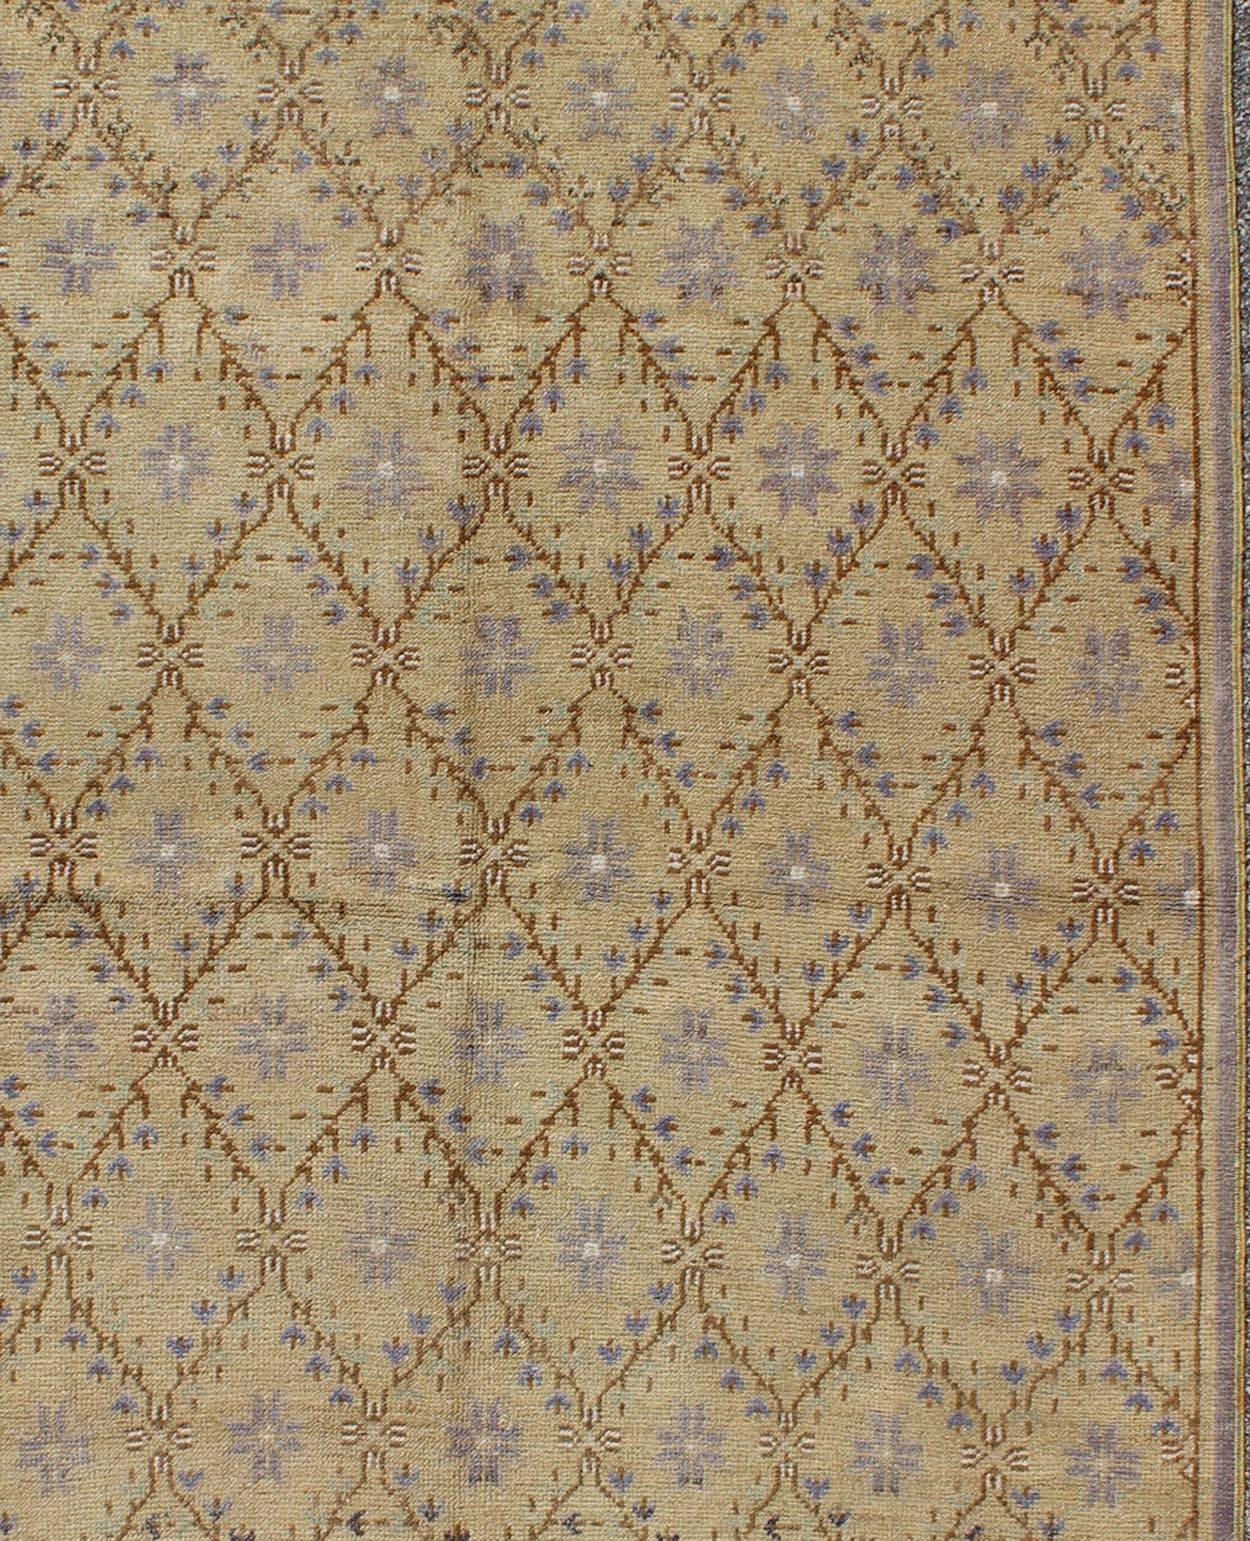 Vintage Turkish Oushak Rug with Lattice Blossom Design in Camel and Gray Colors In Excellent Condition For Sale In Atlanta, GA